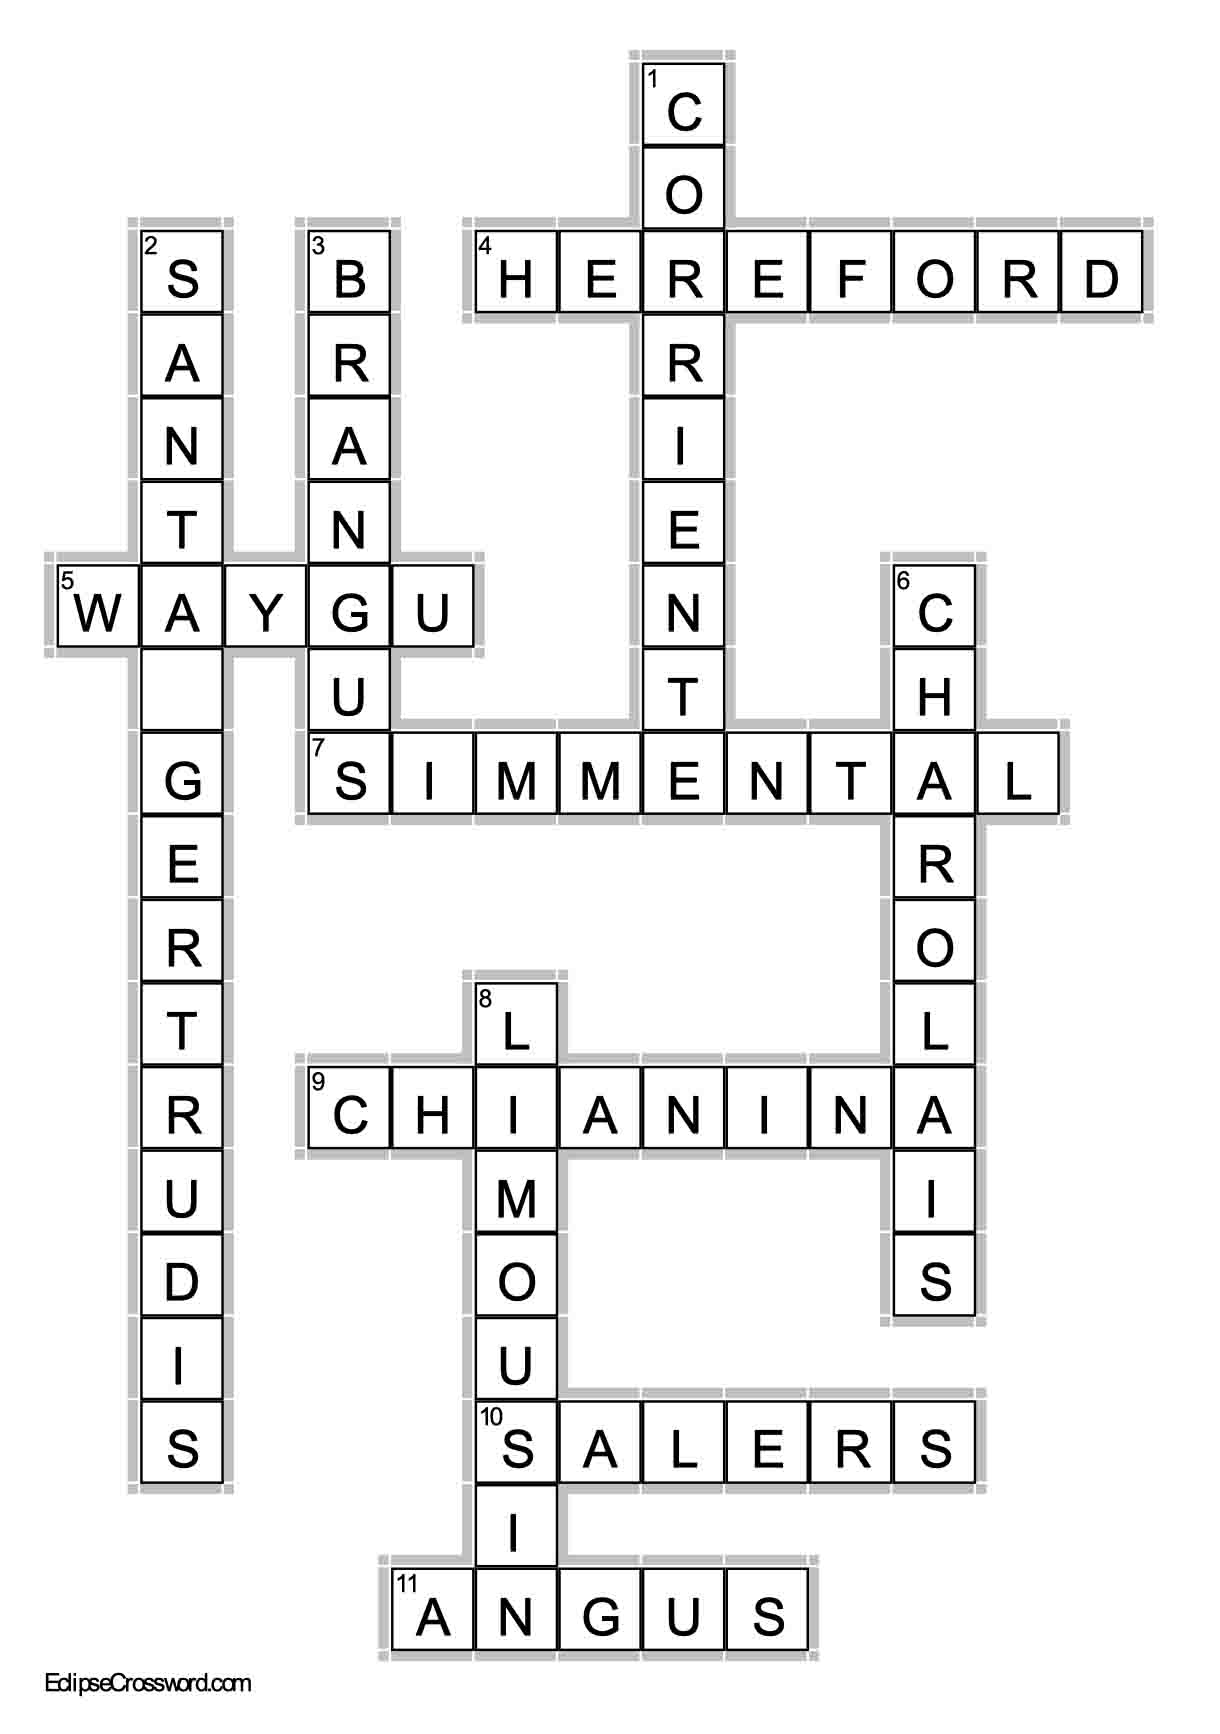 Answer Key for Cattle Breeds Crossword Puzzle